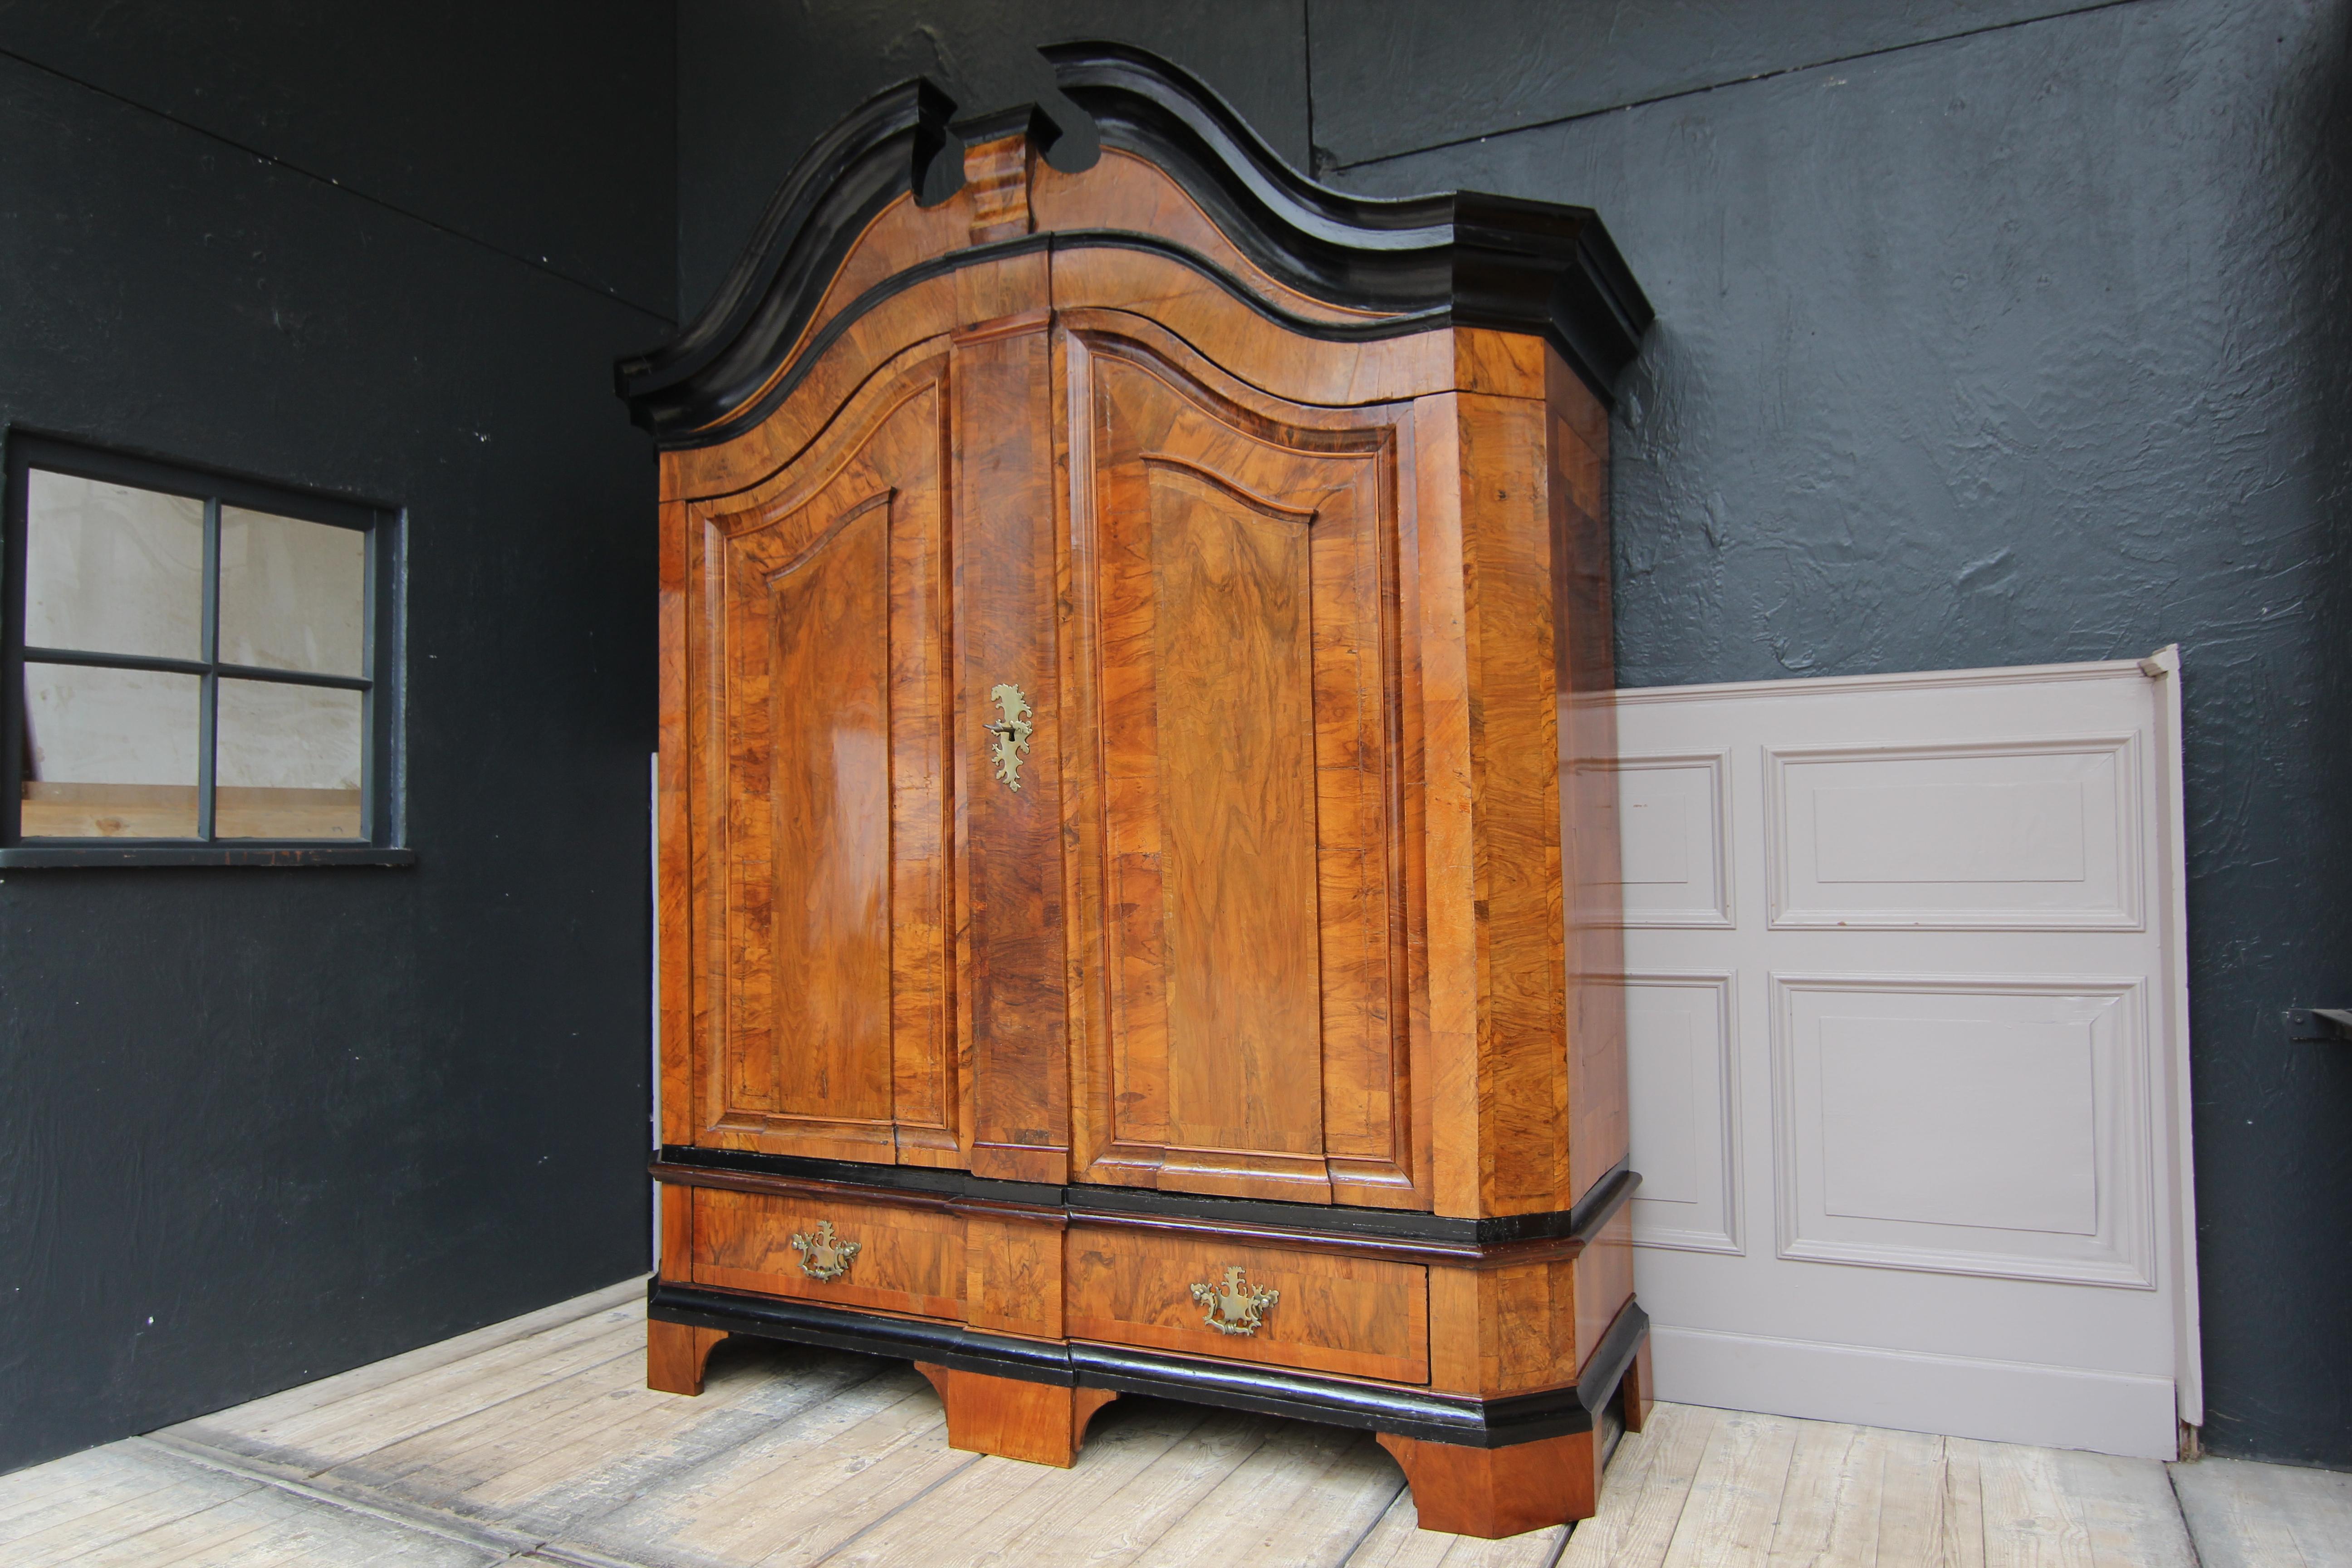 Northern German Baroque cabinet from the late 18th century.
Walnut veneered on oak. Ebonized head strip and profile strips on the base.
Two-door body standing on 5 feet with bevelled corners. Profiled base with large drawer. Curved, blown gable